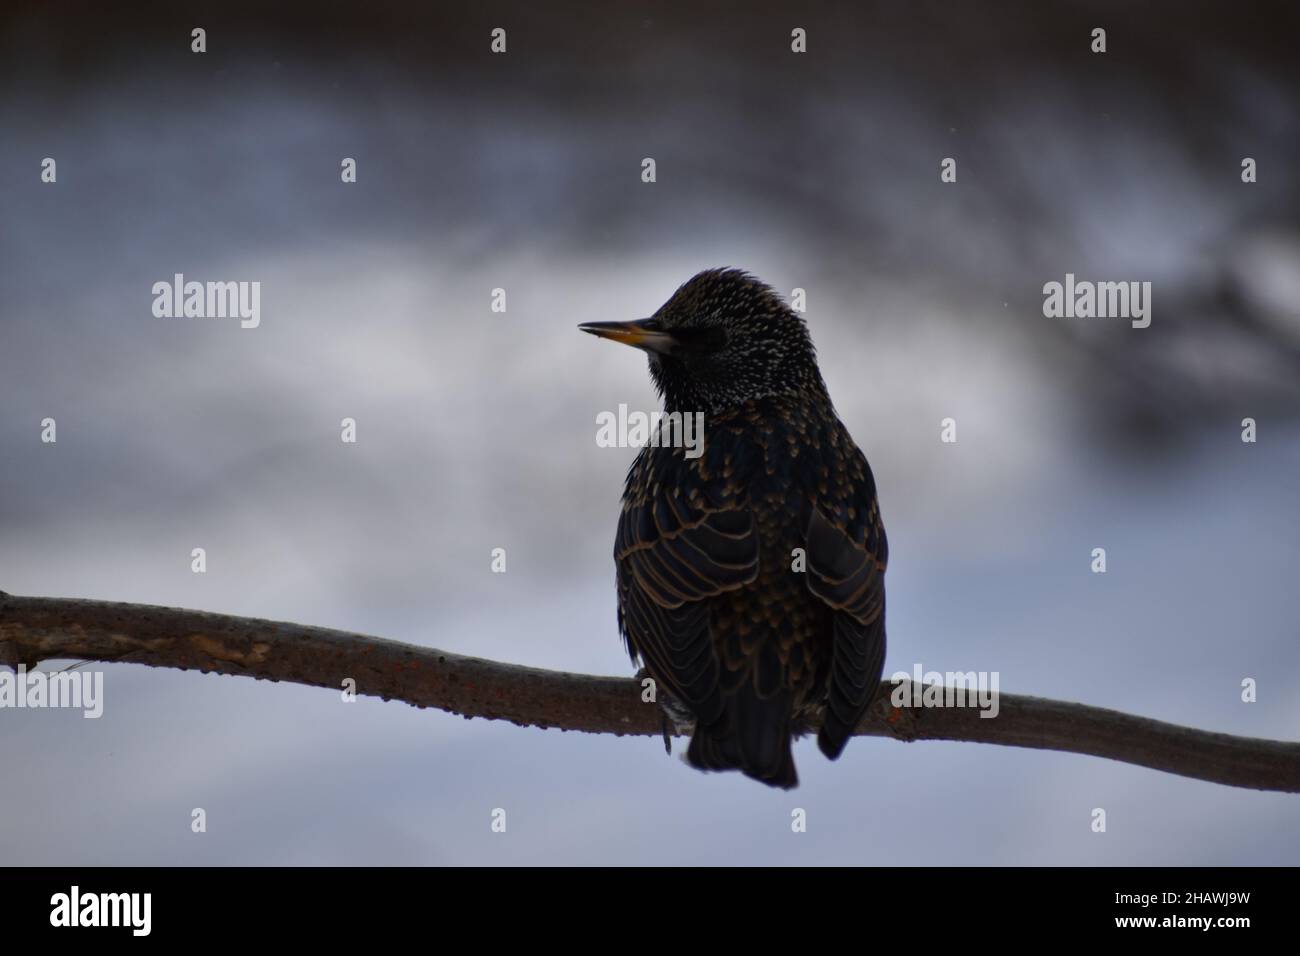 A starling on a branch Stock Photo